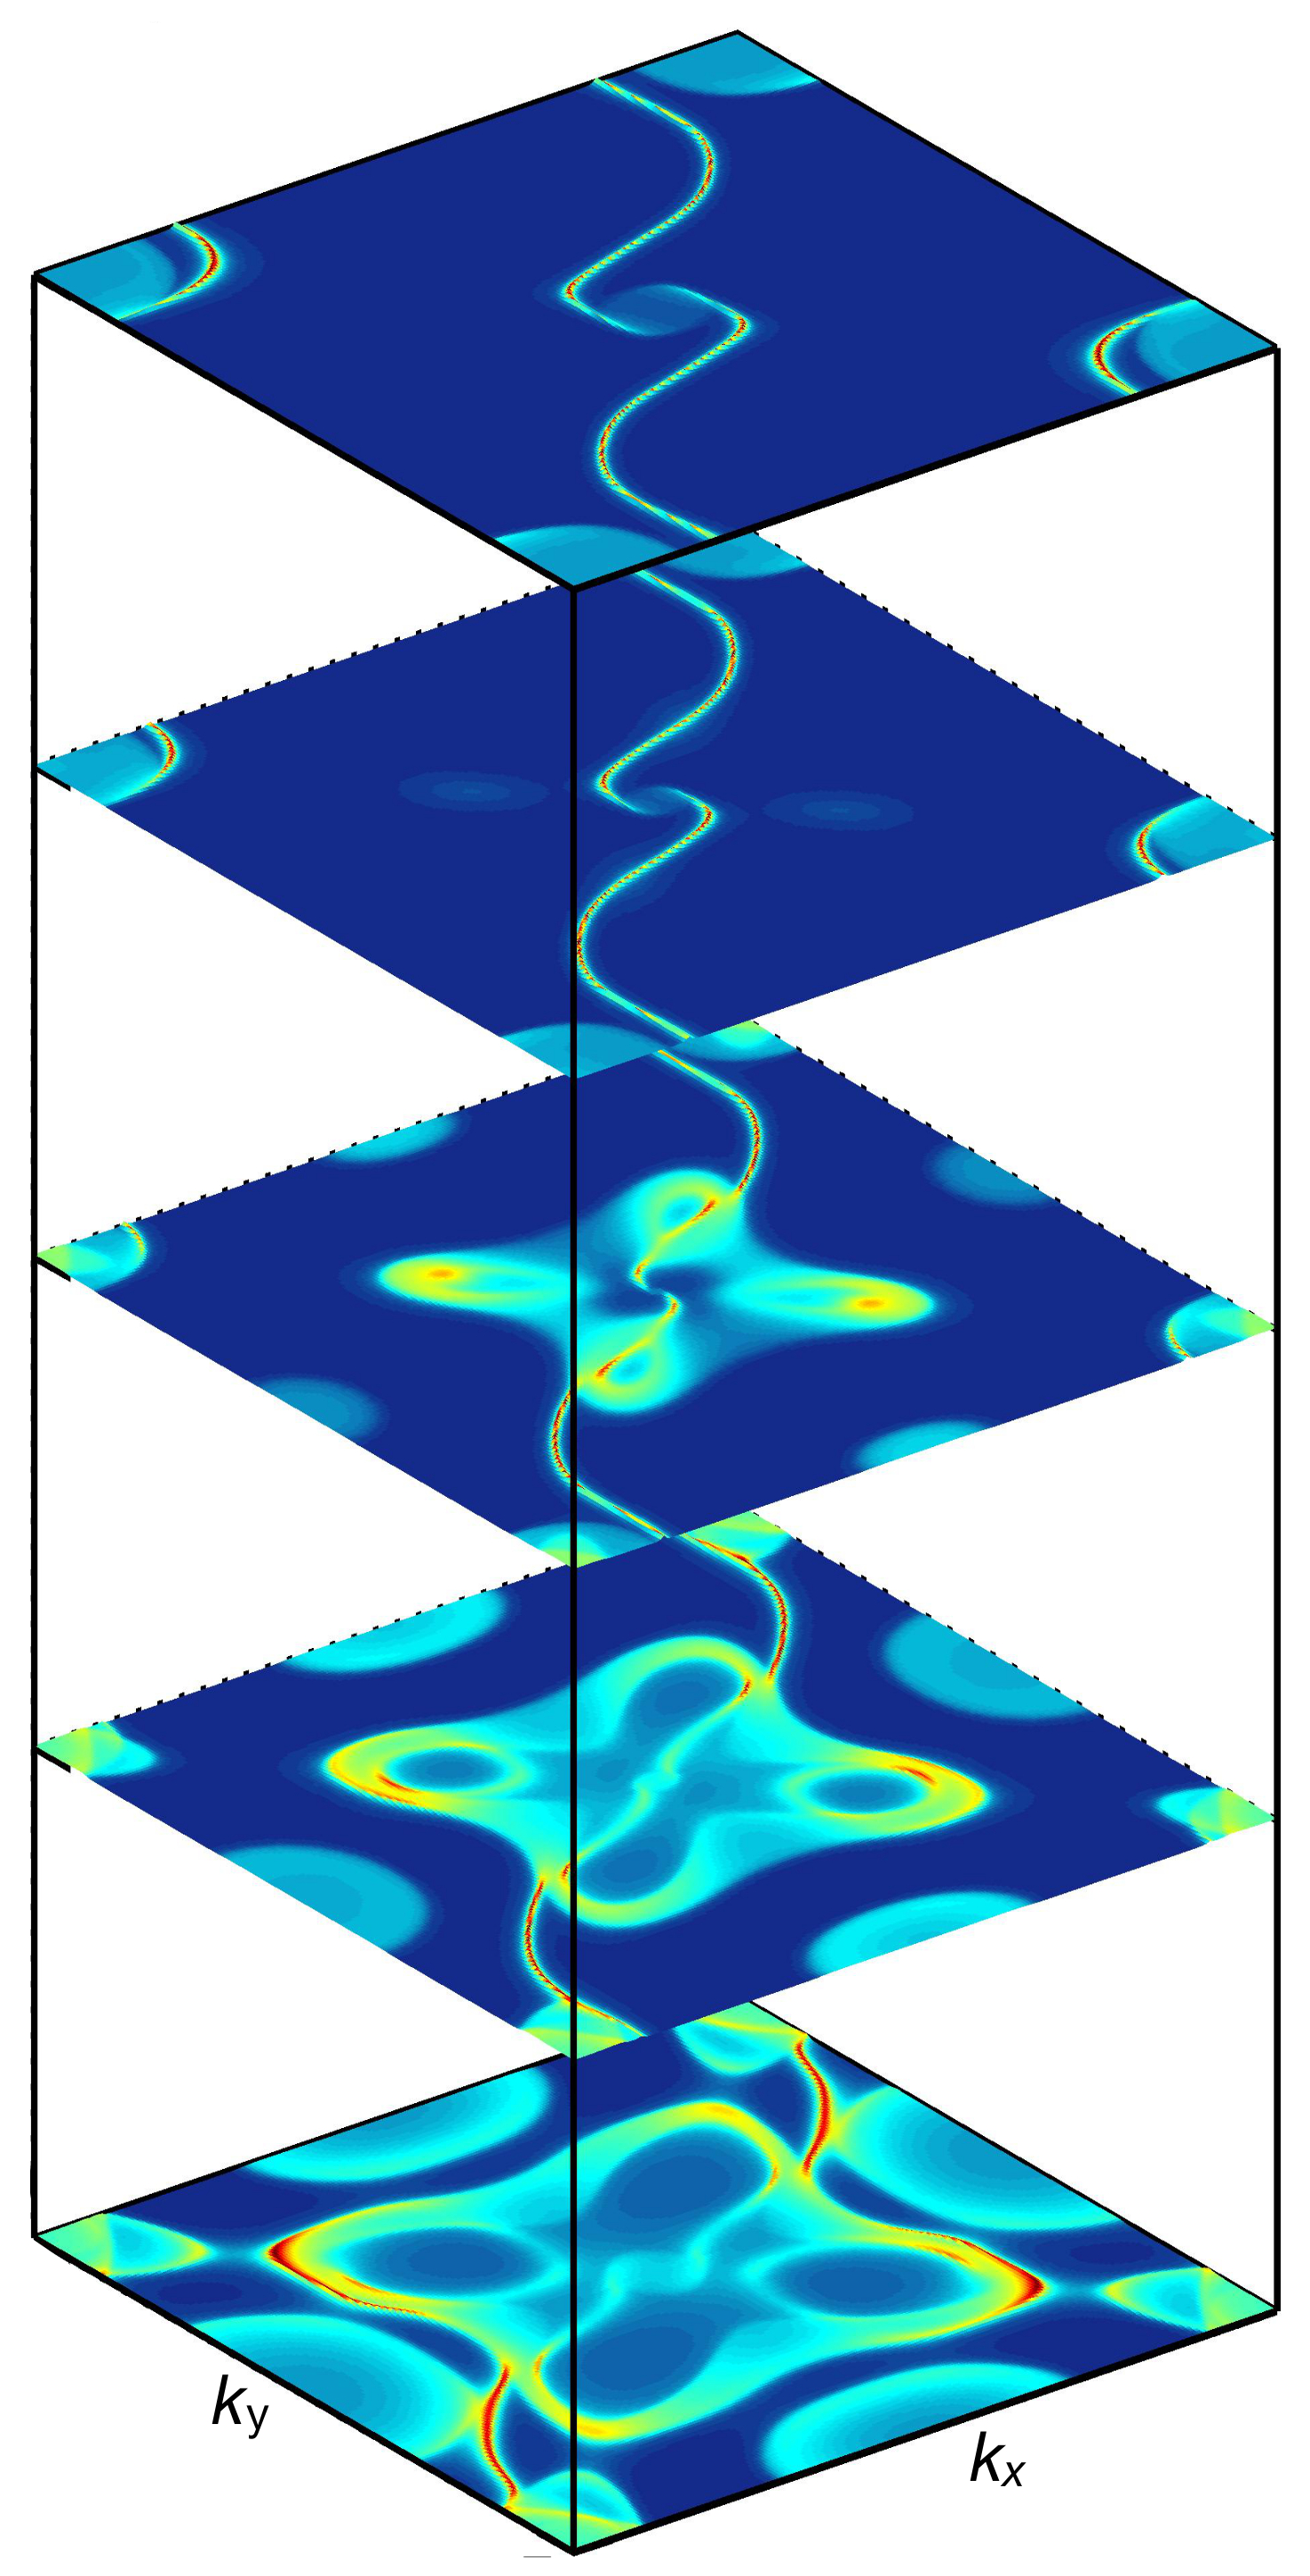 Image - A simulation showing the spiral structure of Fermi arc properties across different layers of the cobalt-silicon samples. (Credit: Hasan Lab/Princeton University)